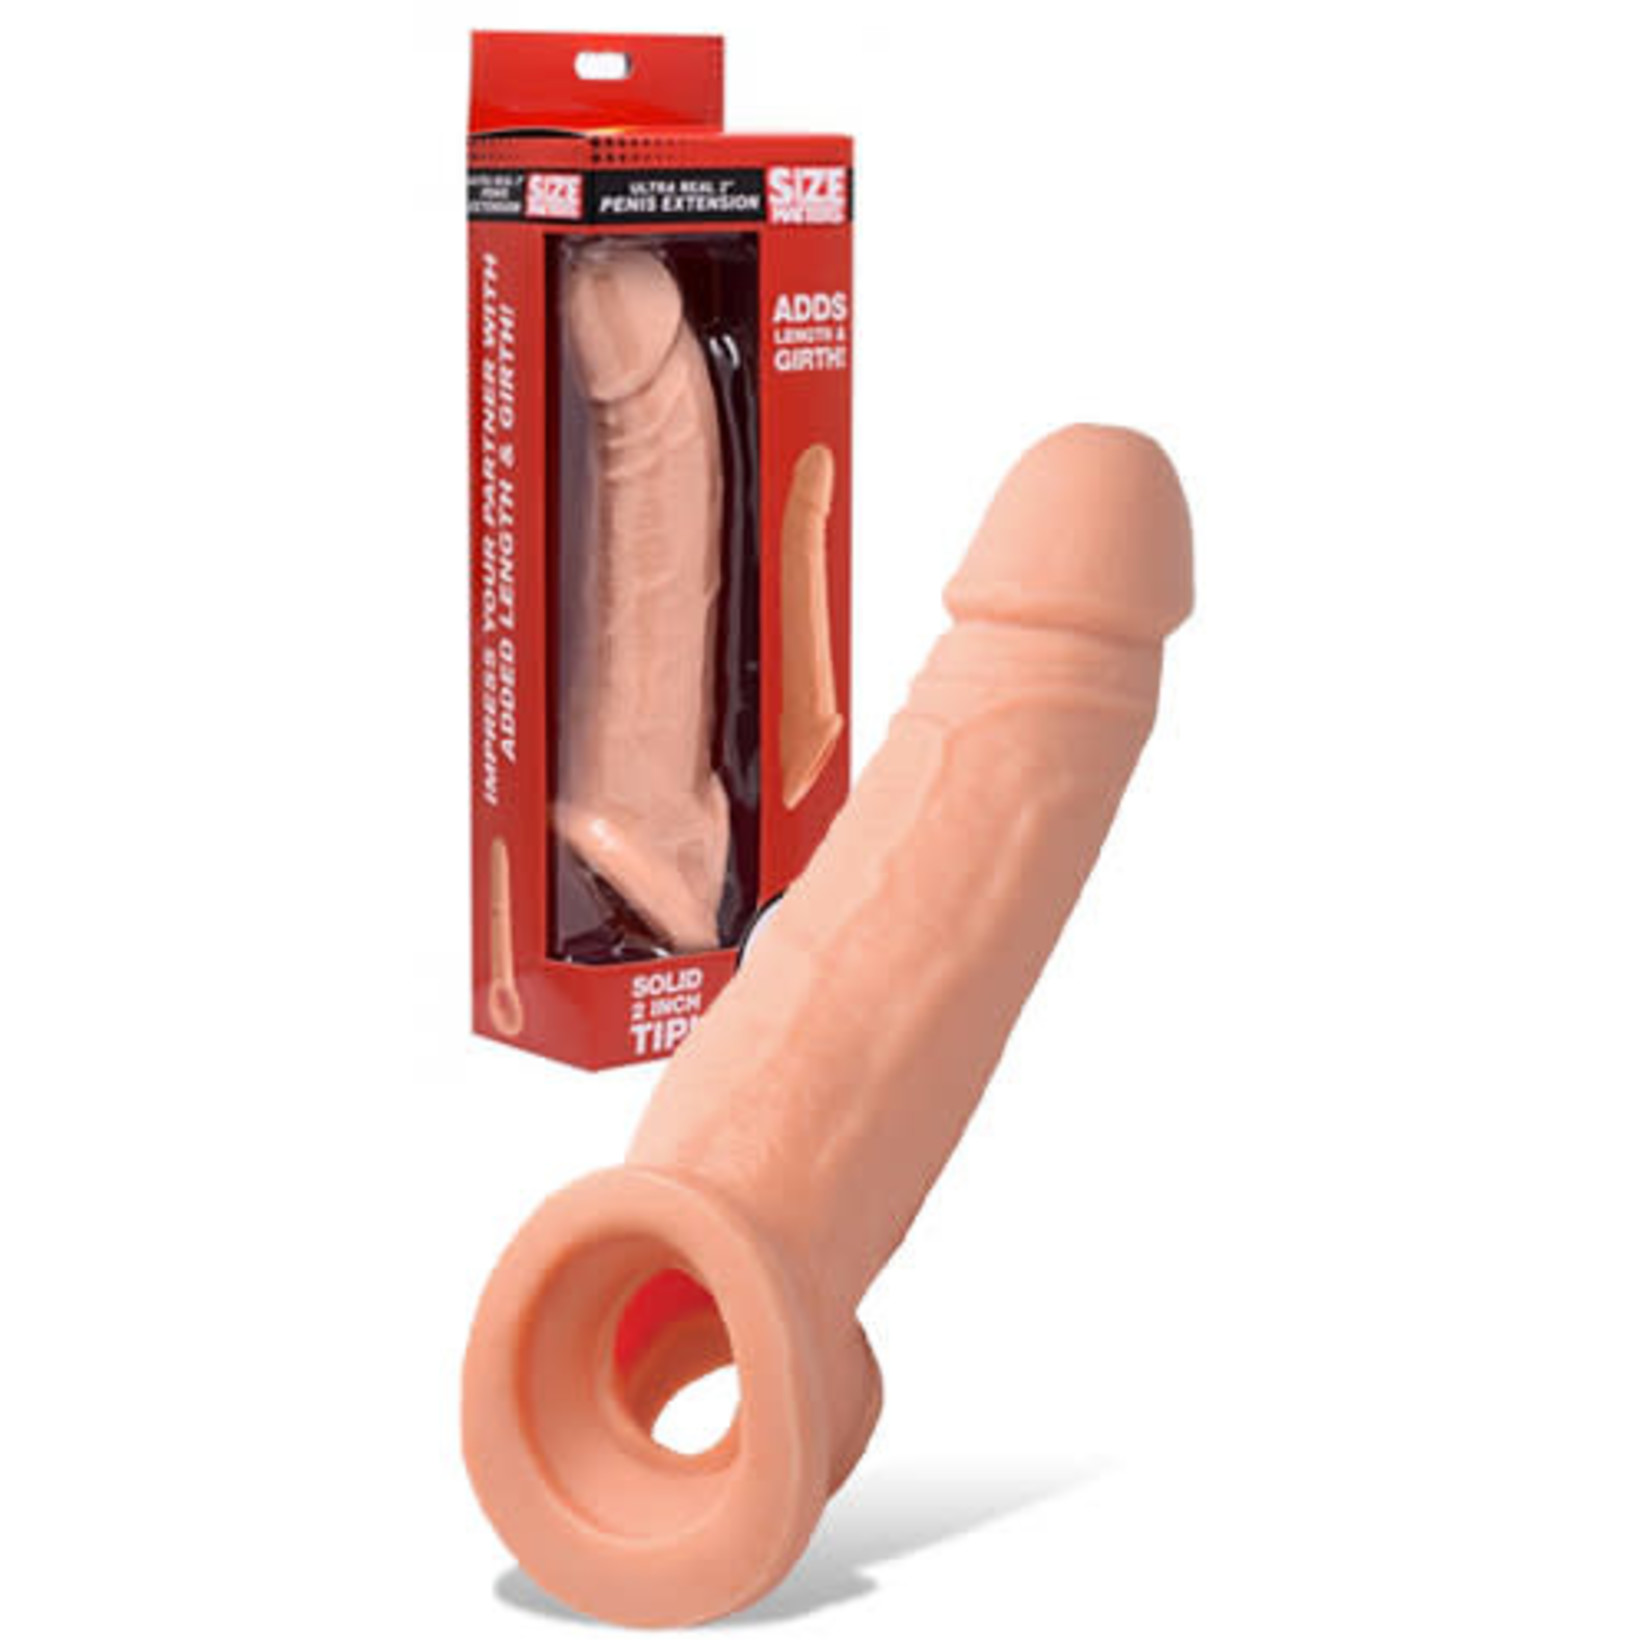 XR BRANDS SIZE MATTERS - ULTRA REAL 1 INCH PENIS EXTENSION